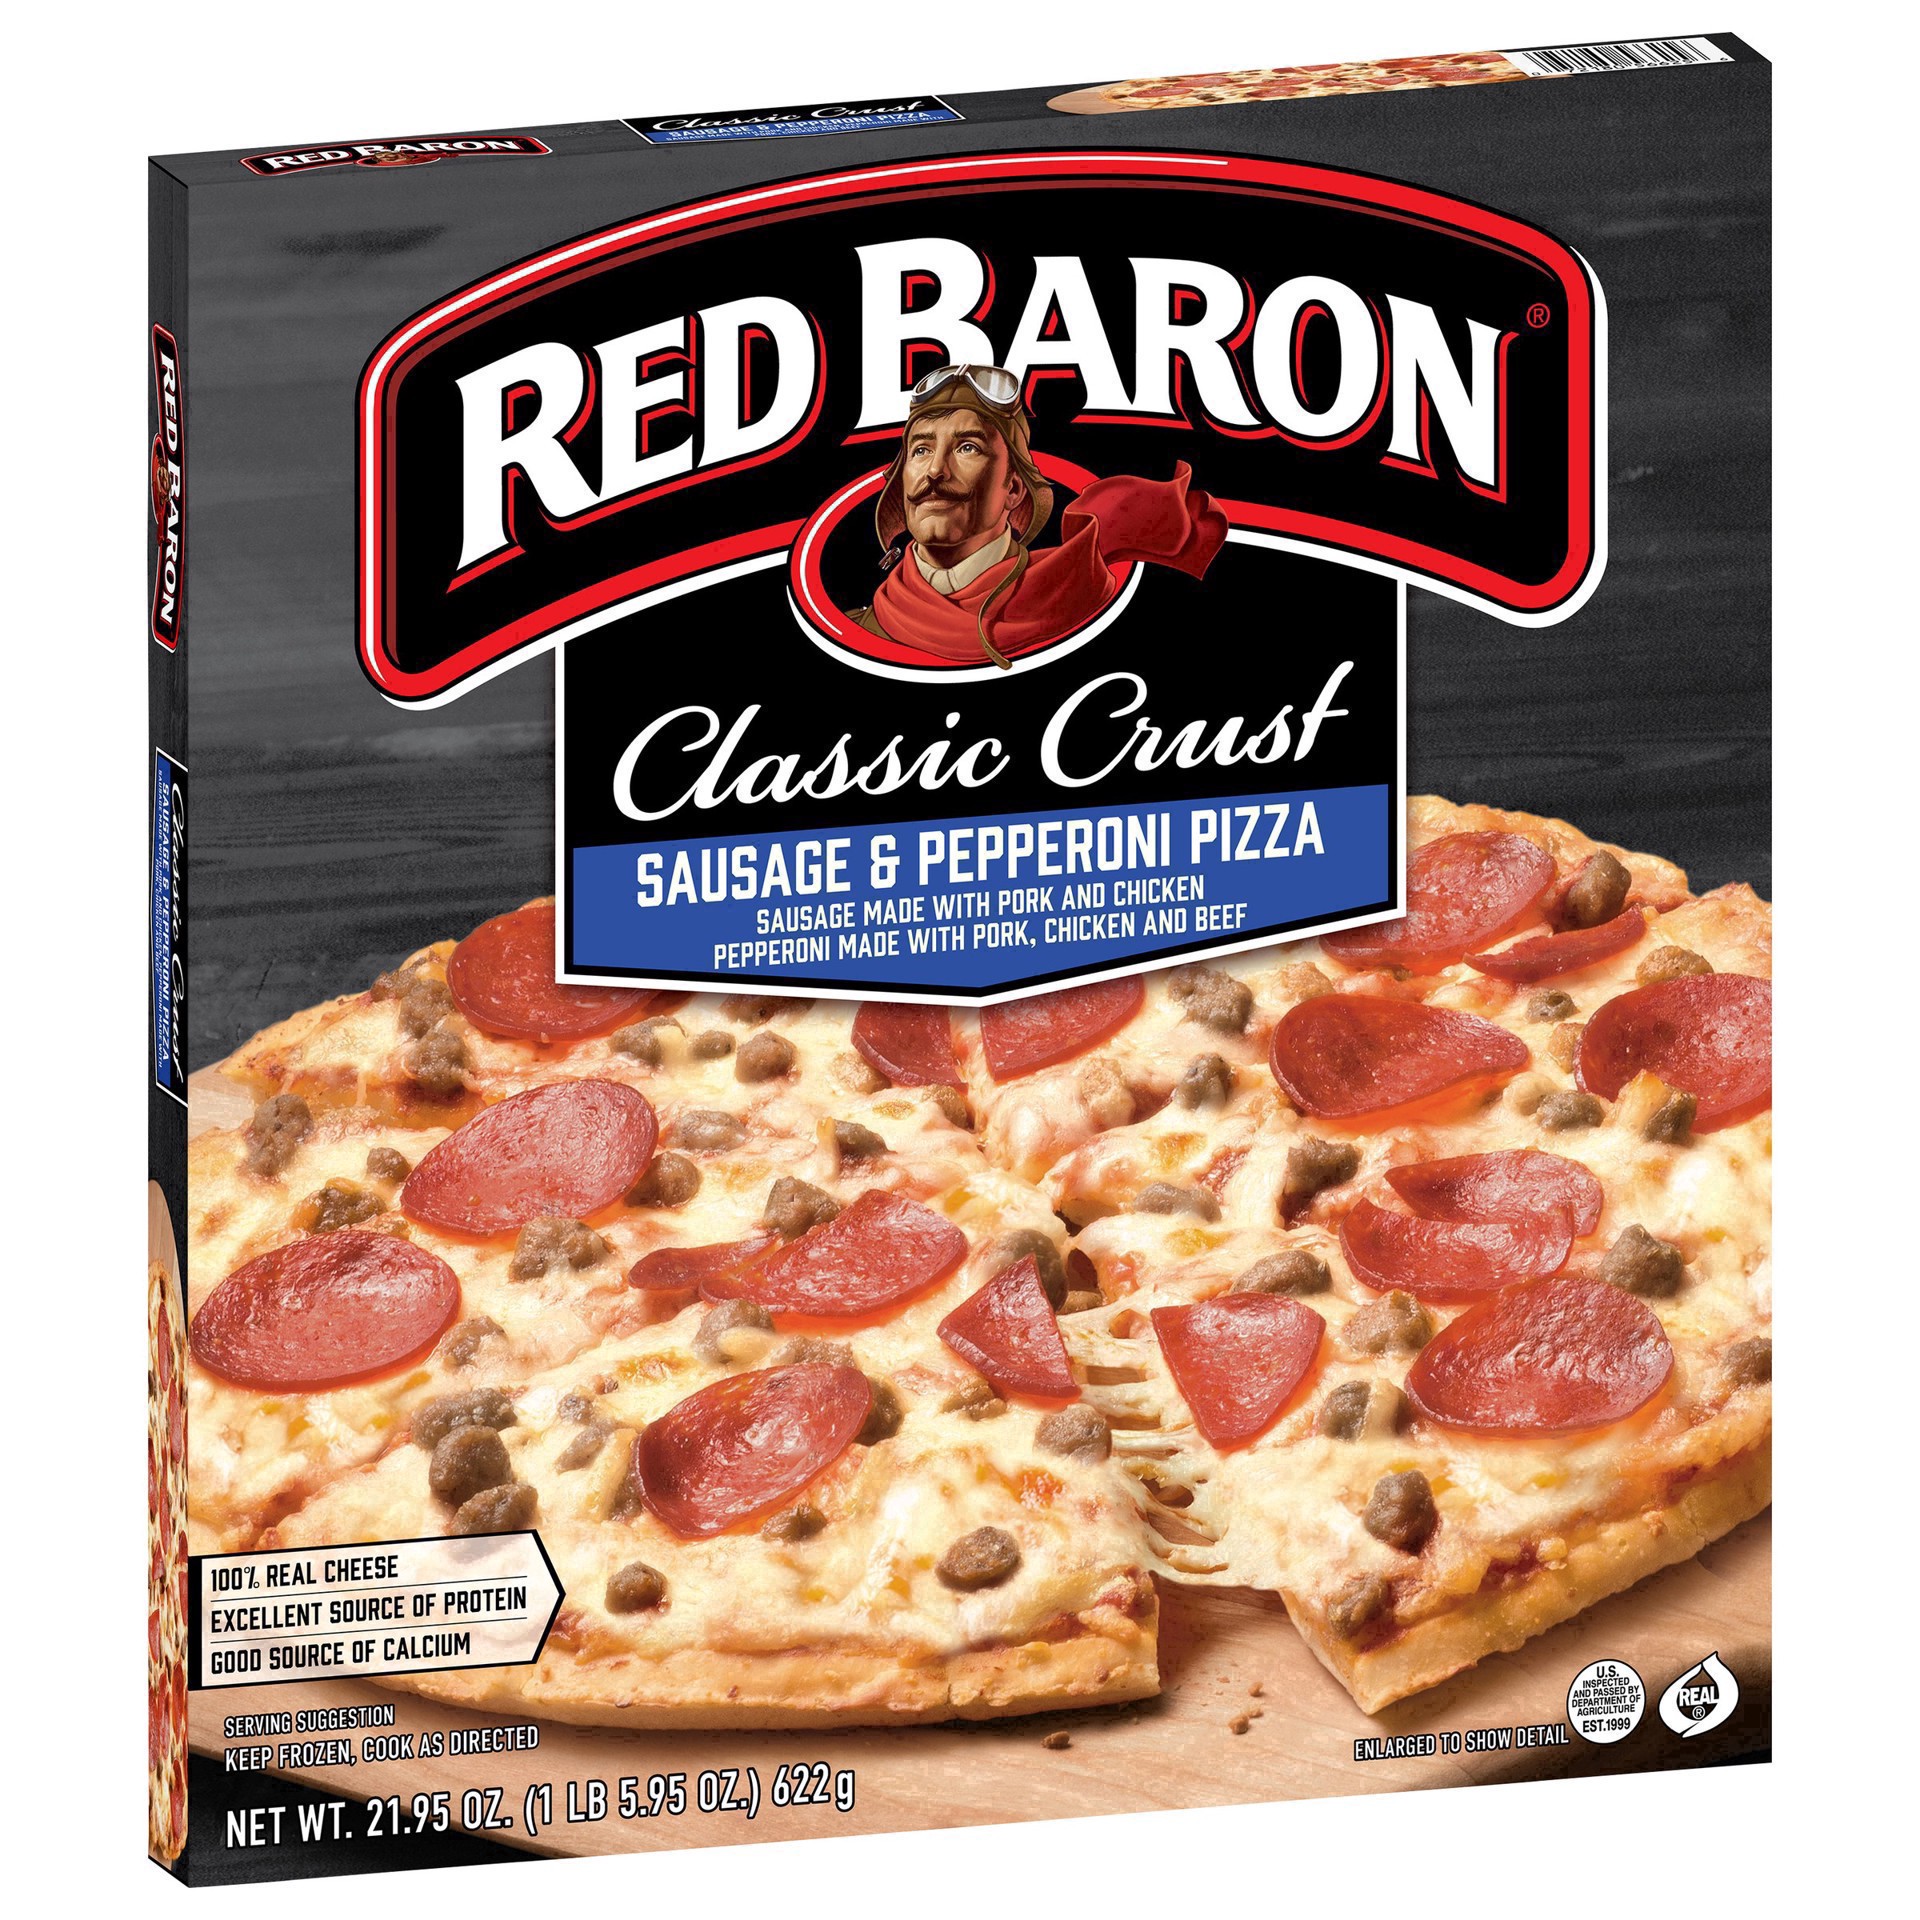 slide 46 of 49, Red Baron Frozen Pizza Classic Crust Sausage & Pepperoni, 21.95 oz